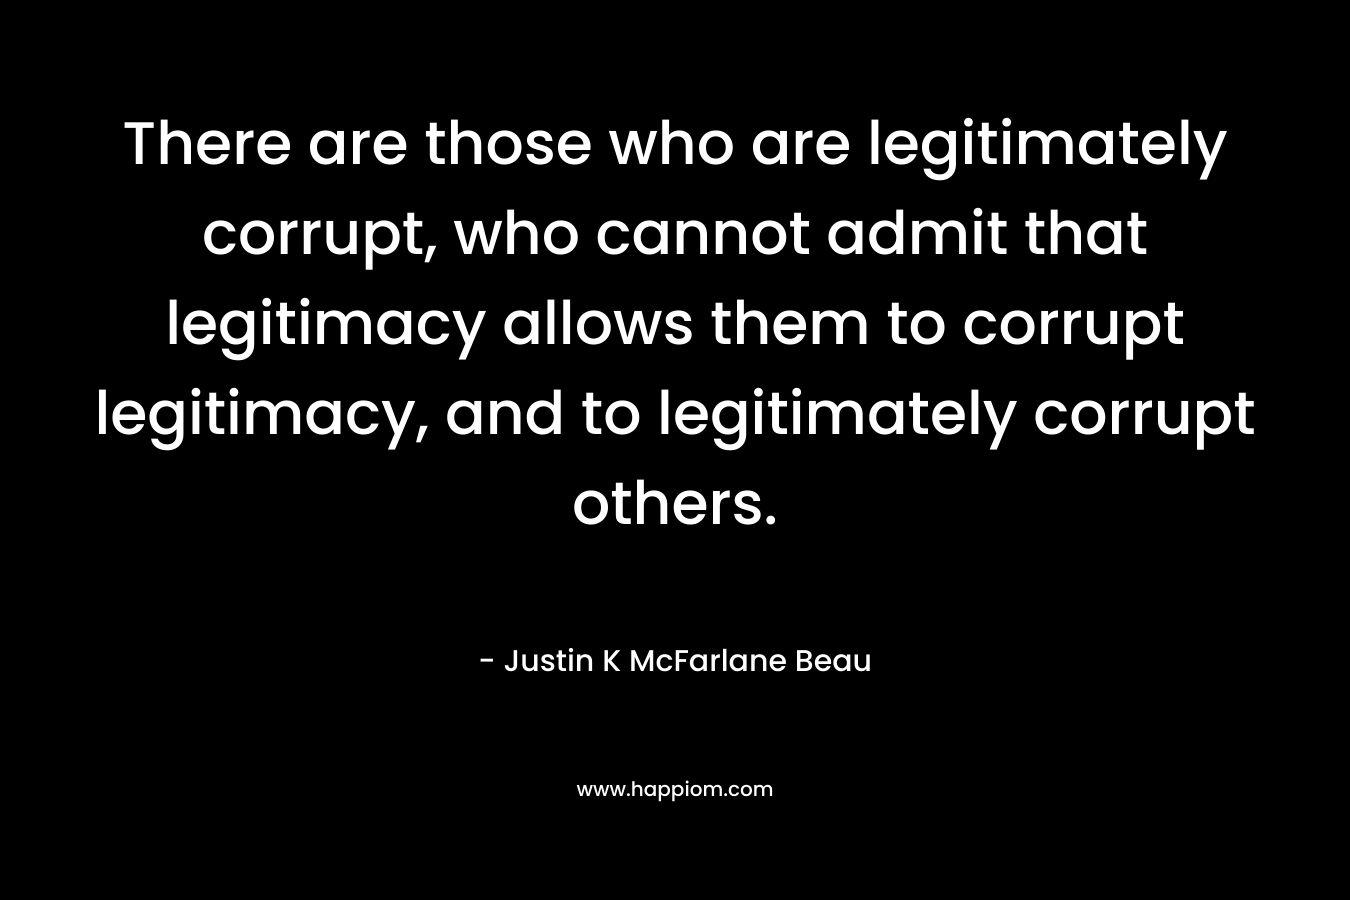 There are those who are legitimately corrupt, who cannot admit that legitimacy allows them to corrupt legitimacy, and to legitimately corrupt others. – Justin K McFarlane Beau